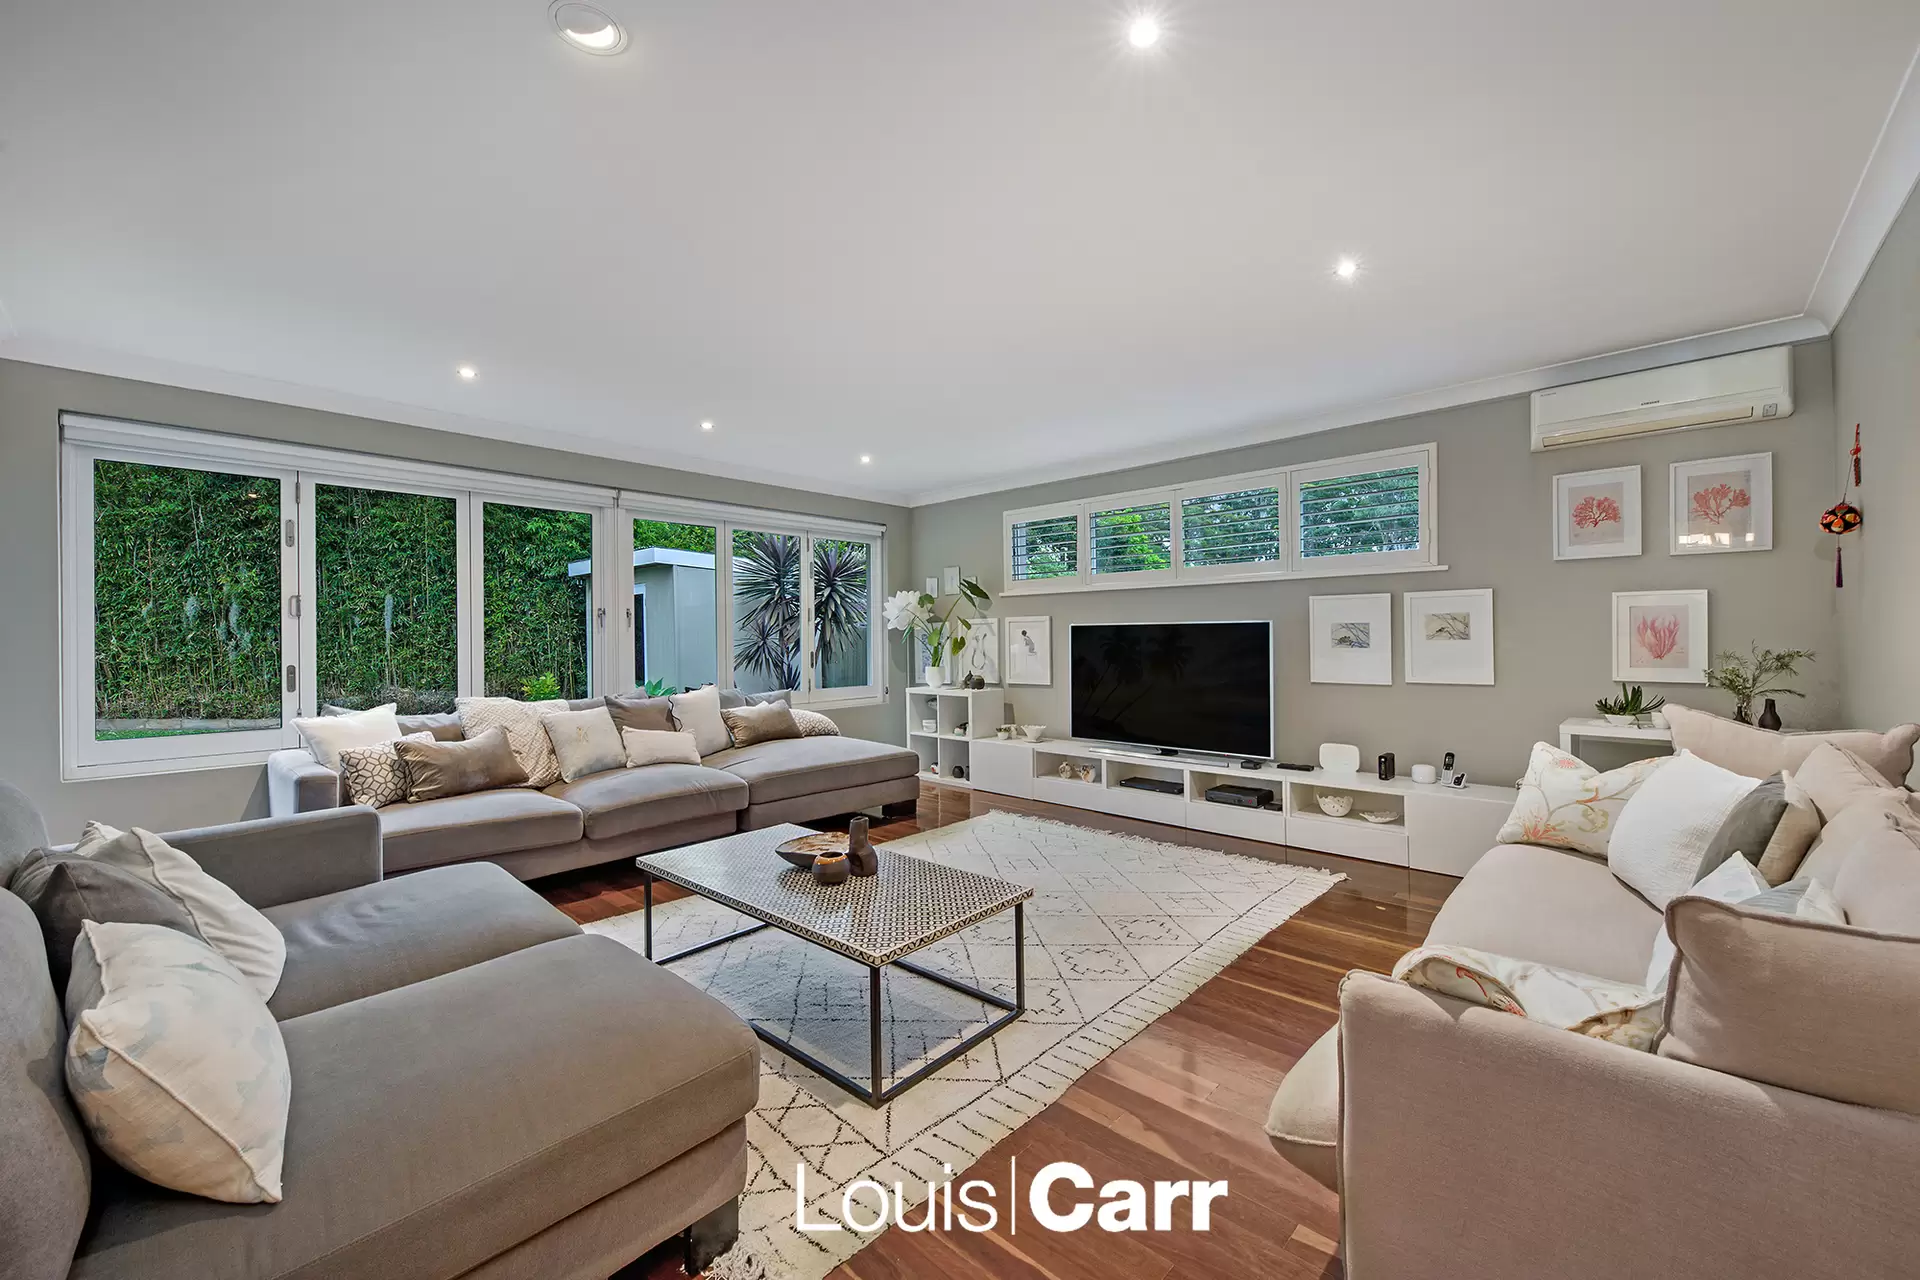 Photo #6: 47 Cambewarra Avenue, Castle Hill - For Sale by Louis Carr Real Estate